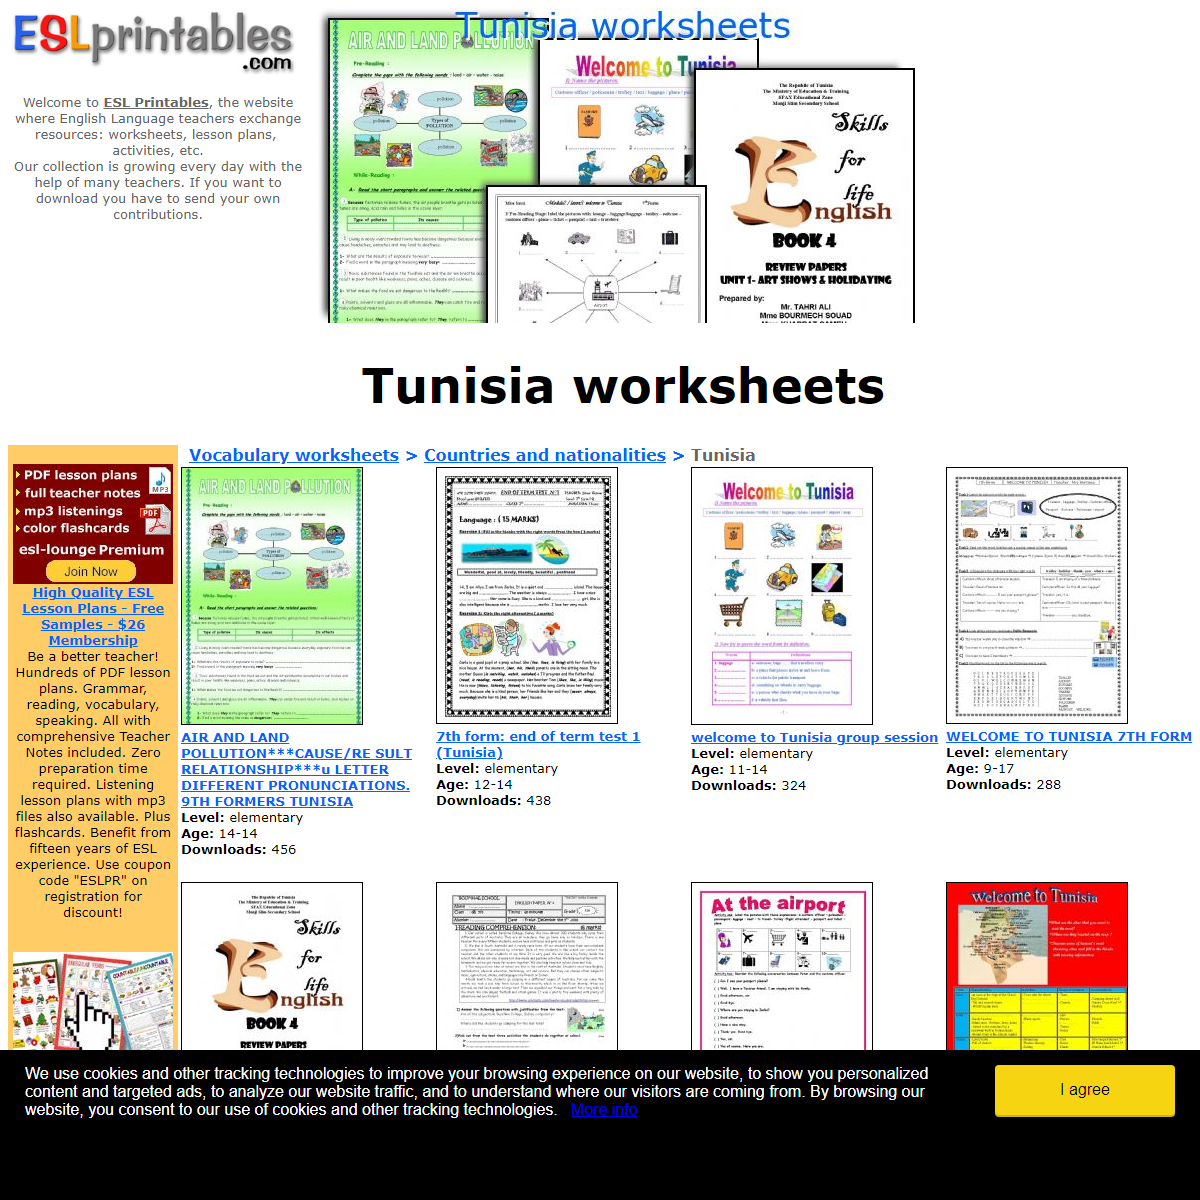 A complete backup of https://www.eslprintables.com/vocabulary_worksheets/countries_and_nationalities/tunisia/